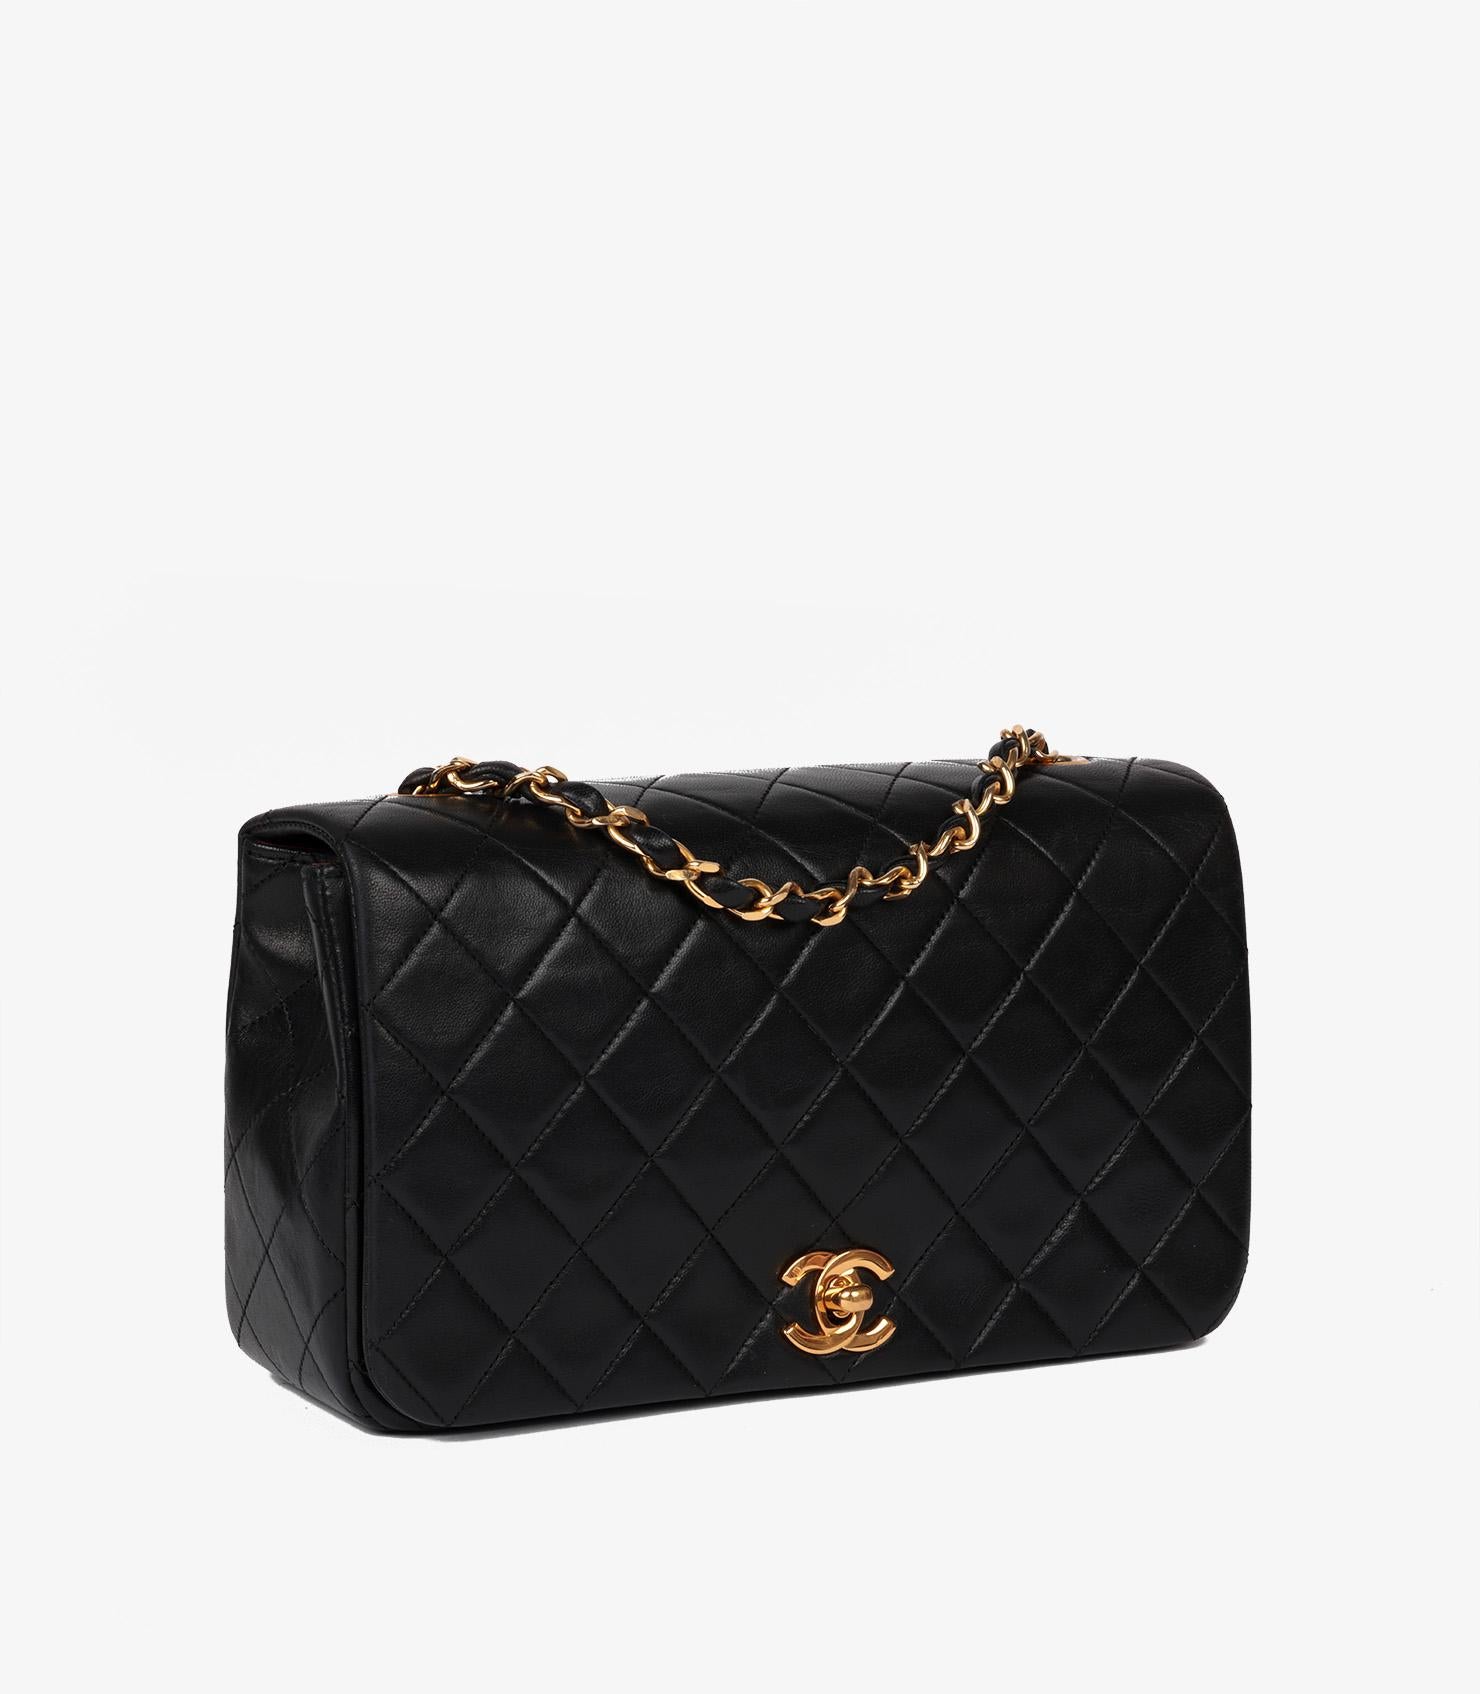 Chanel Black Quilted Lambskin Vintage Small Classic Single Full Flap Bag

Brand-Chanel
Model- Small Classic Single Full Flap Bag
Product Type- Crossbody, Shoulder
Serial Number- 17*****
Age- Circa 1989
Accompanied By- Chanel Dust Bag, Authenticity